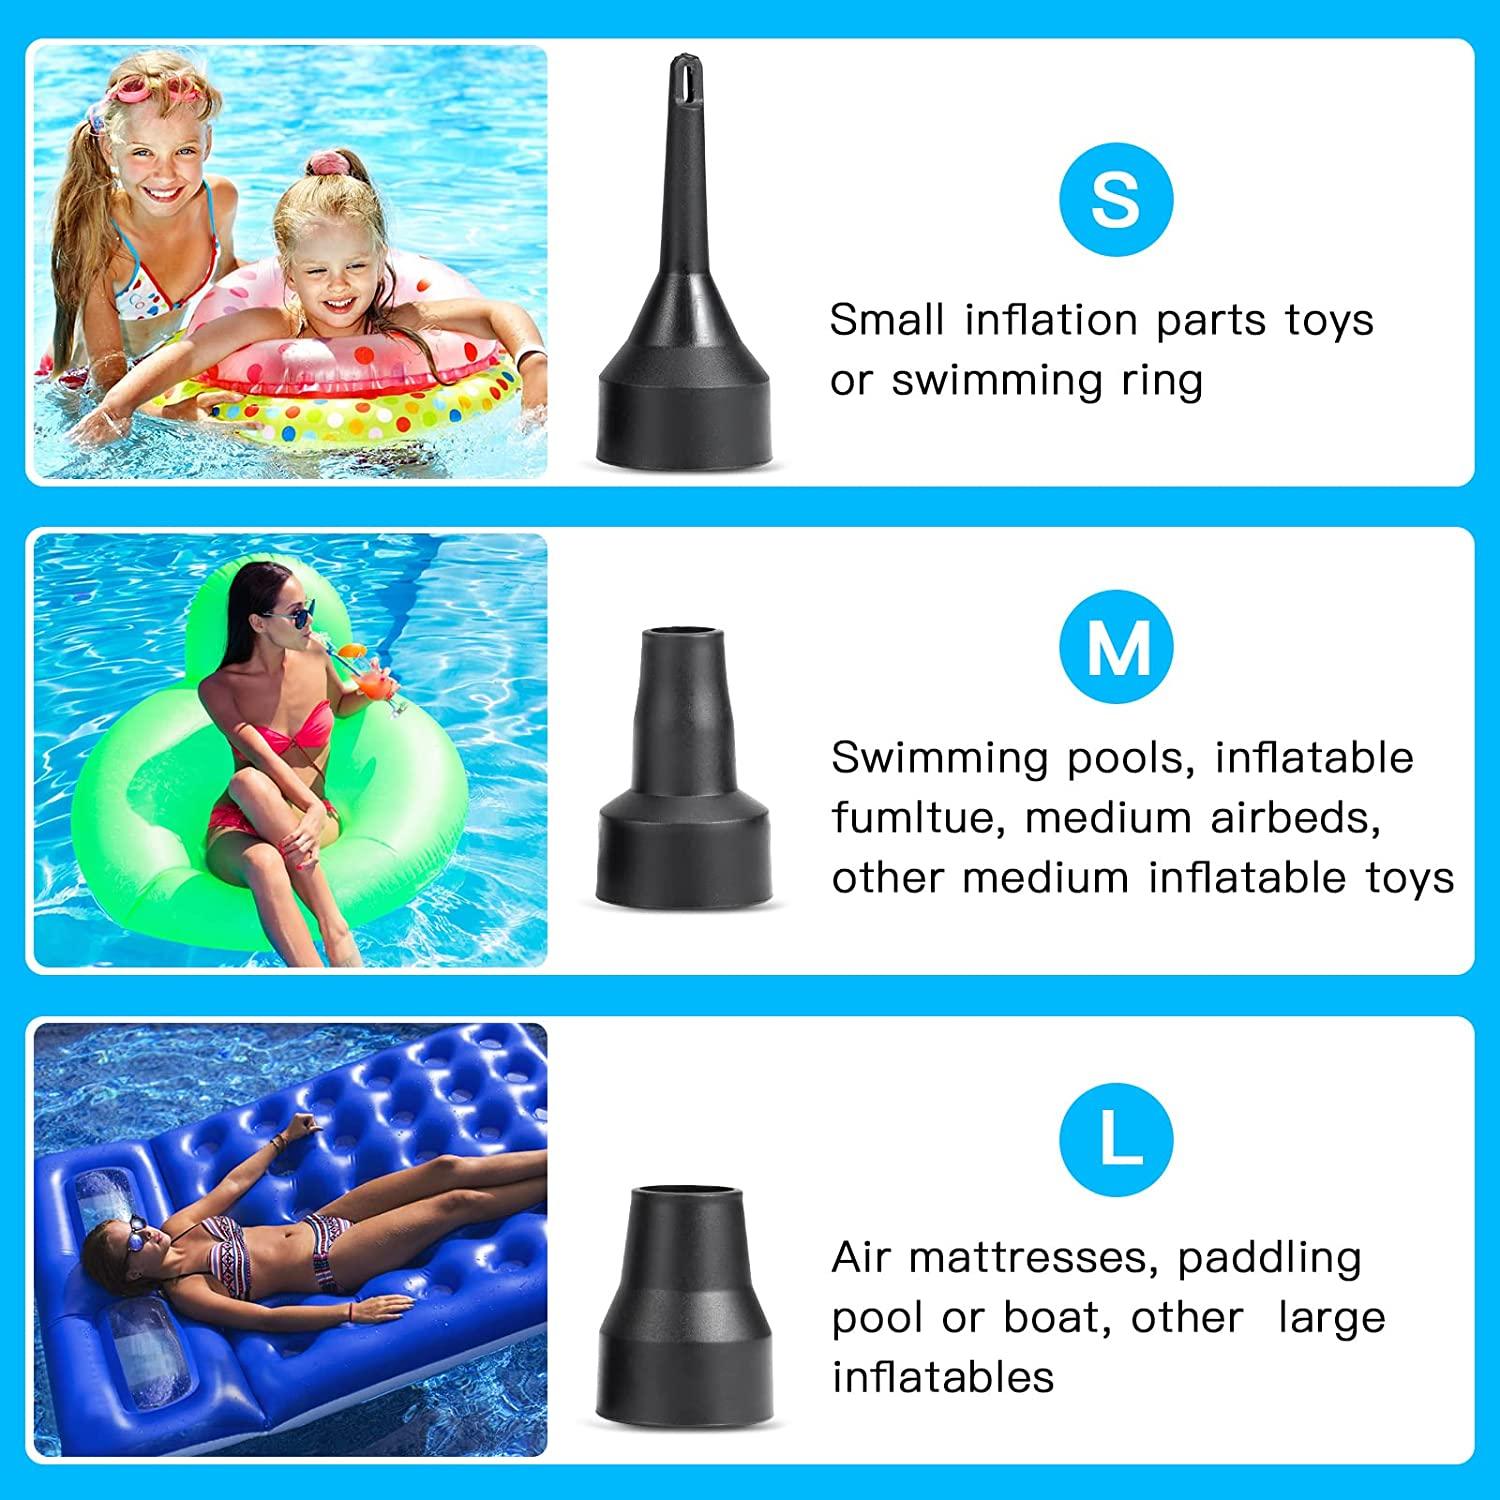 Electric Air Pump for Inflatables, Air Pump Air Mattress Pump with 3 Nozzles Inflator/Deflator Quick Air Pump for Air Bed Paddling Pool Toy Raft Boat Swimming Ring Wintory